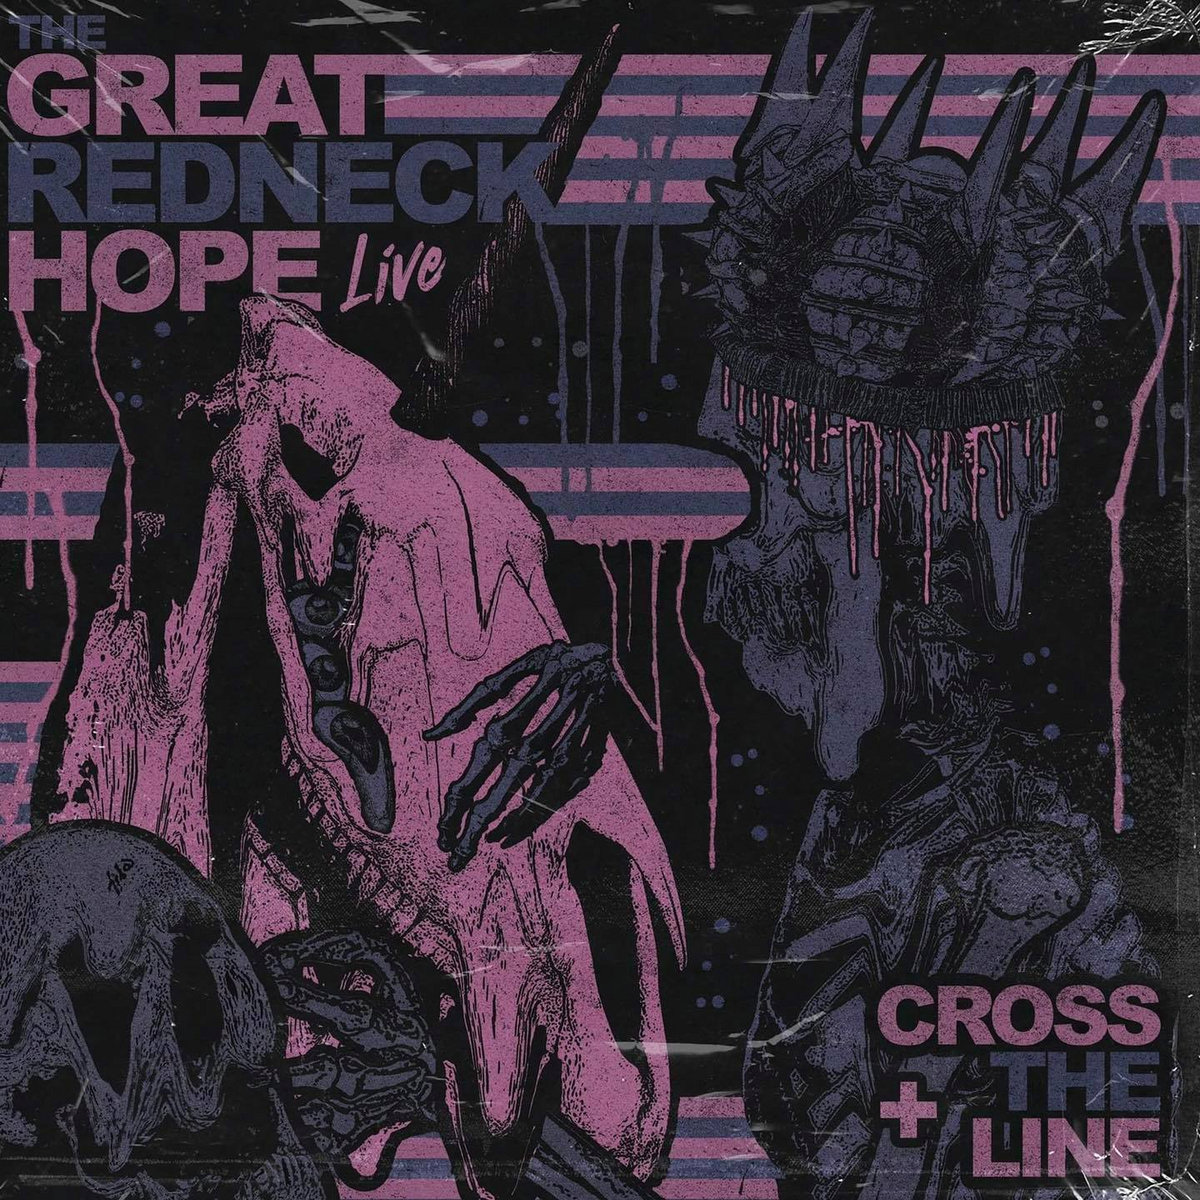 THE GREAT REDNECK HOPE - Live + Cross The Line cover 